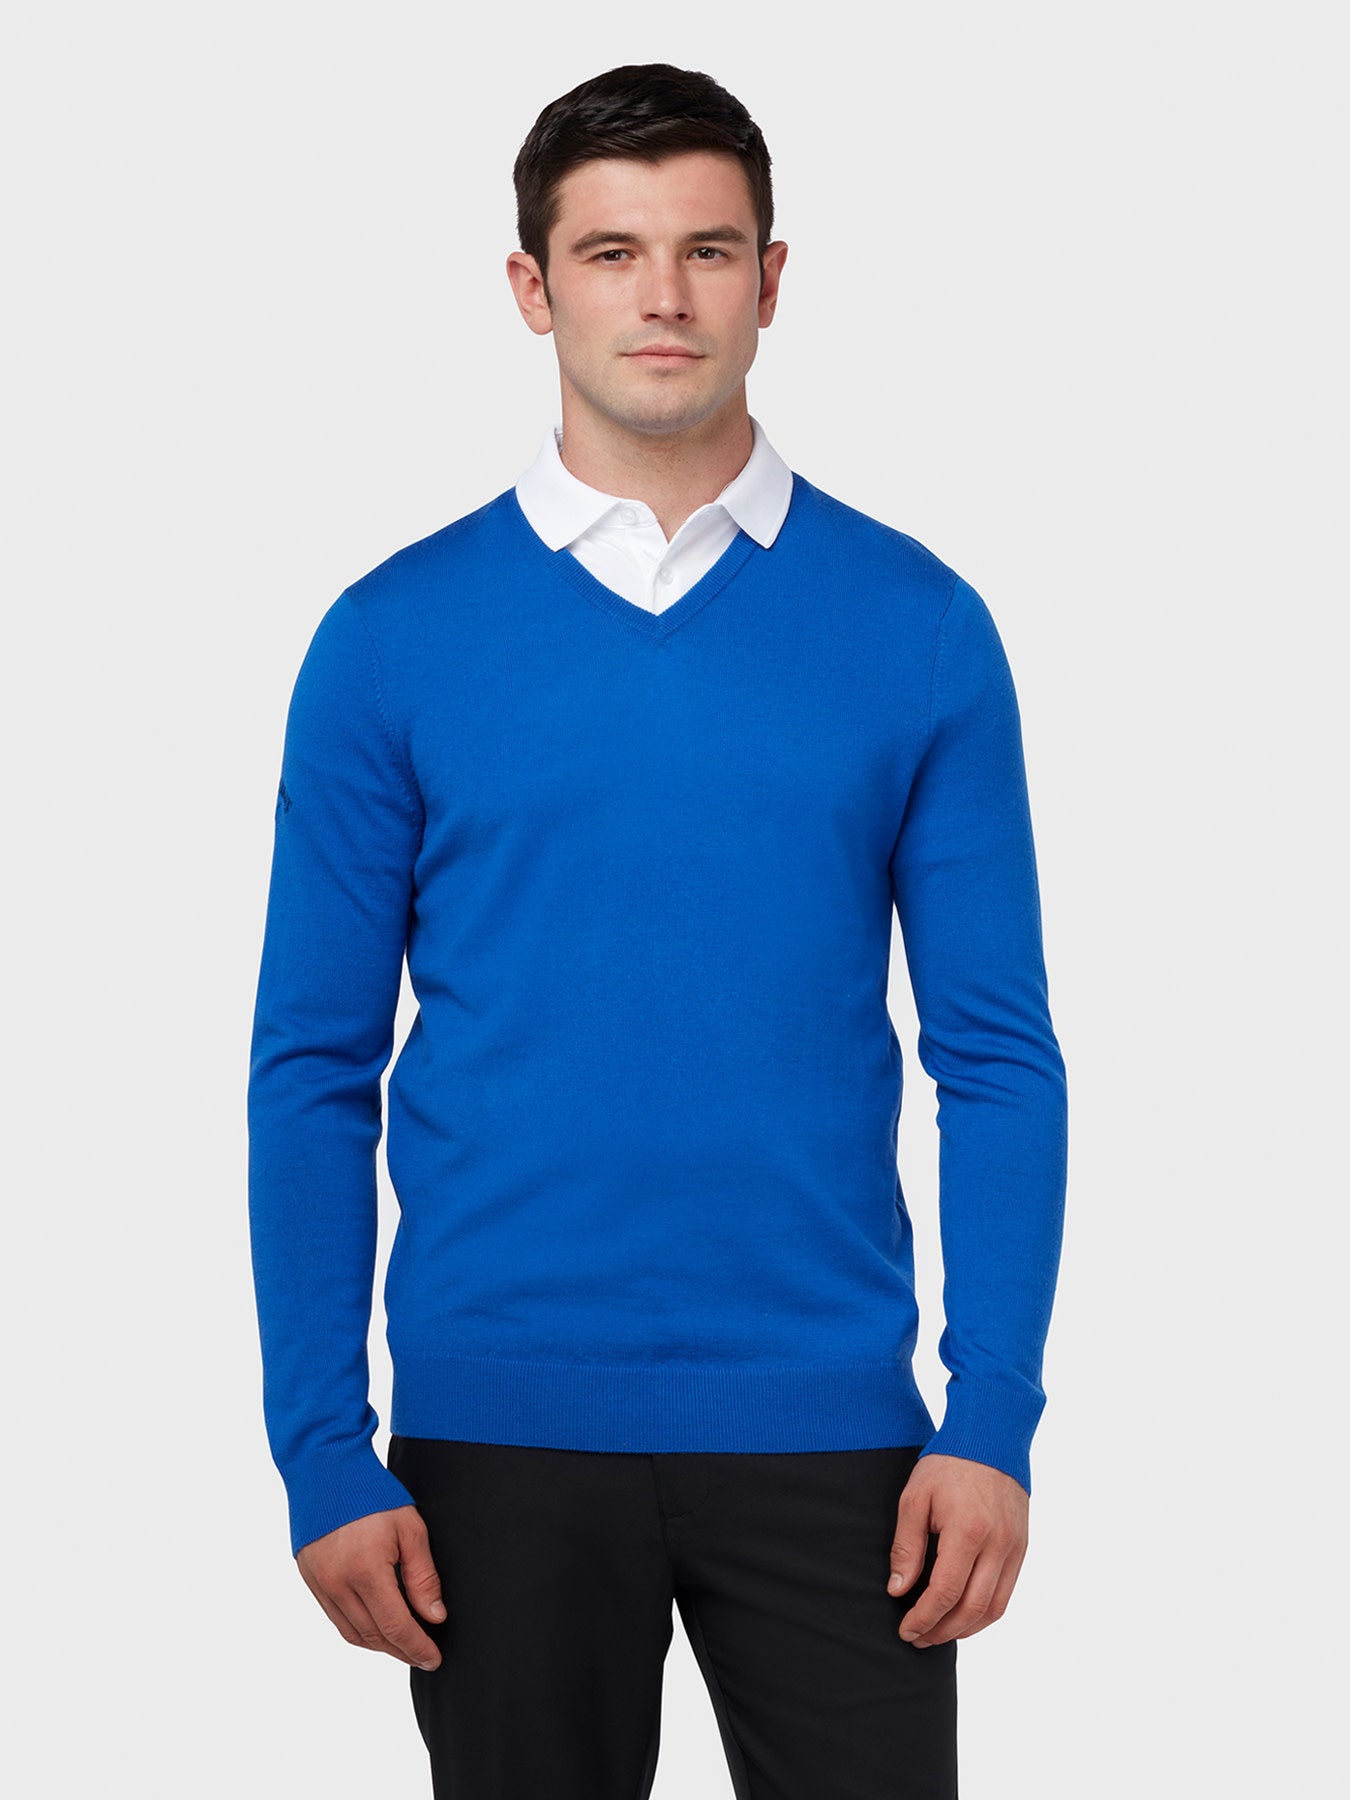 View Thermal Merino Wool VNeck Sweater In Surfing Blue Surfing Blue XS information